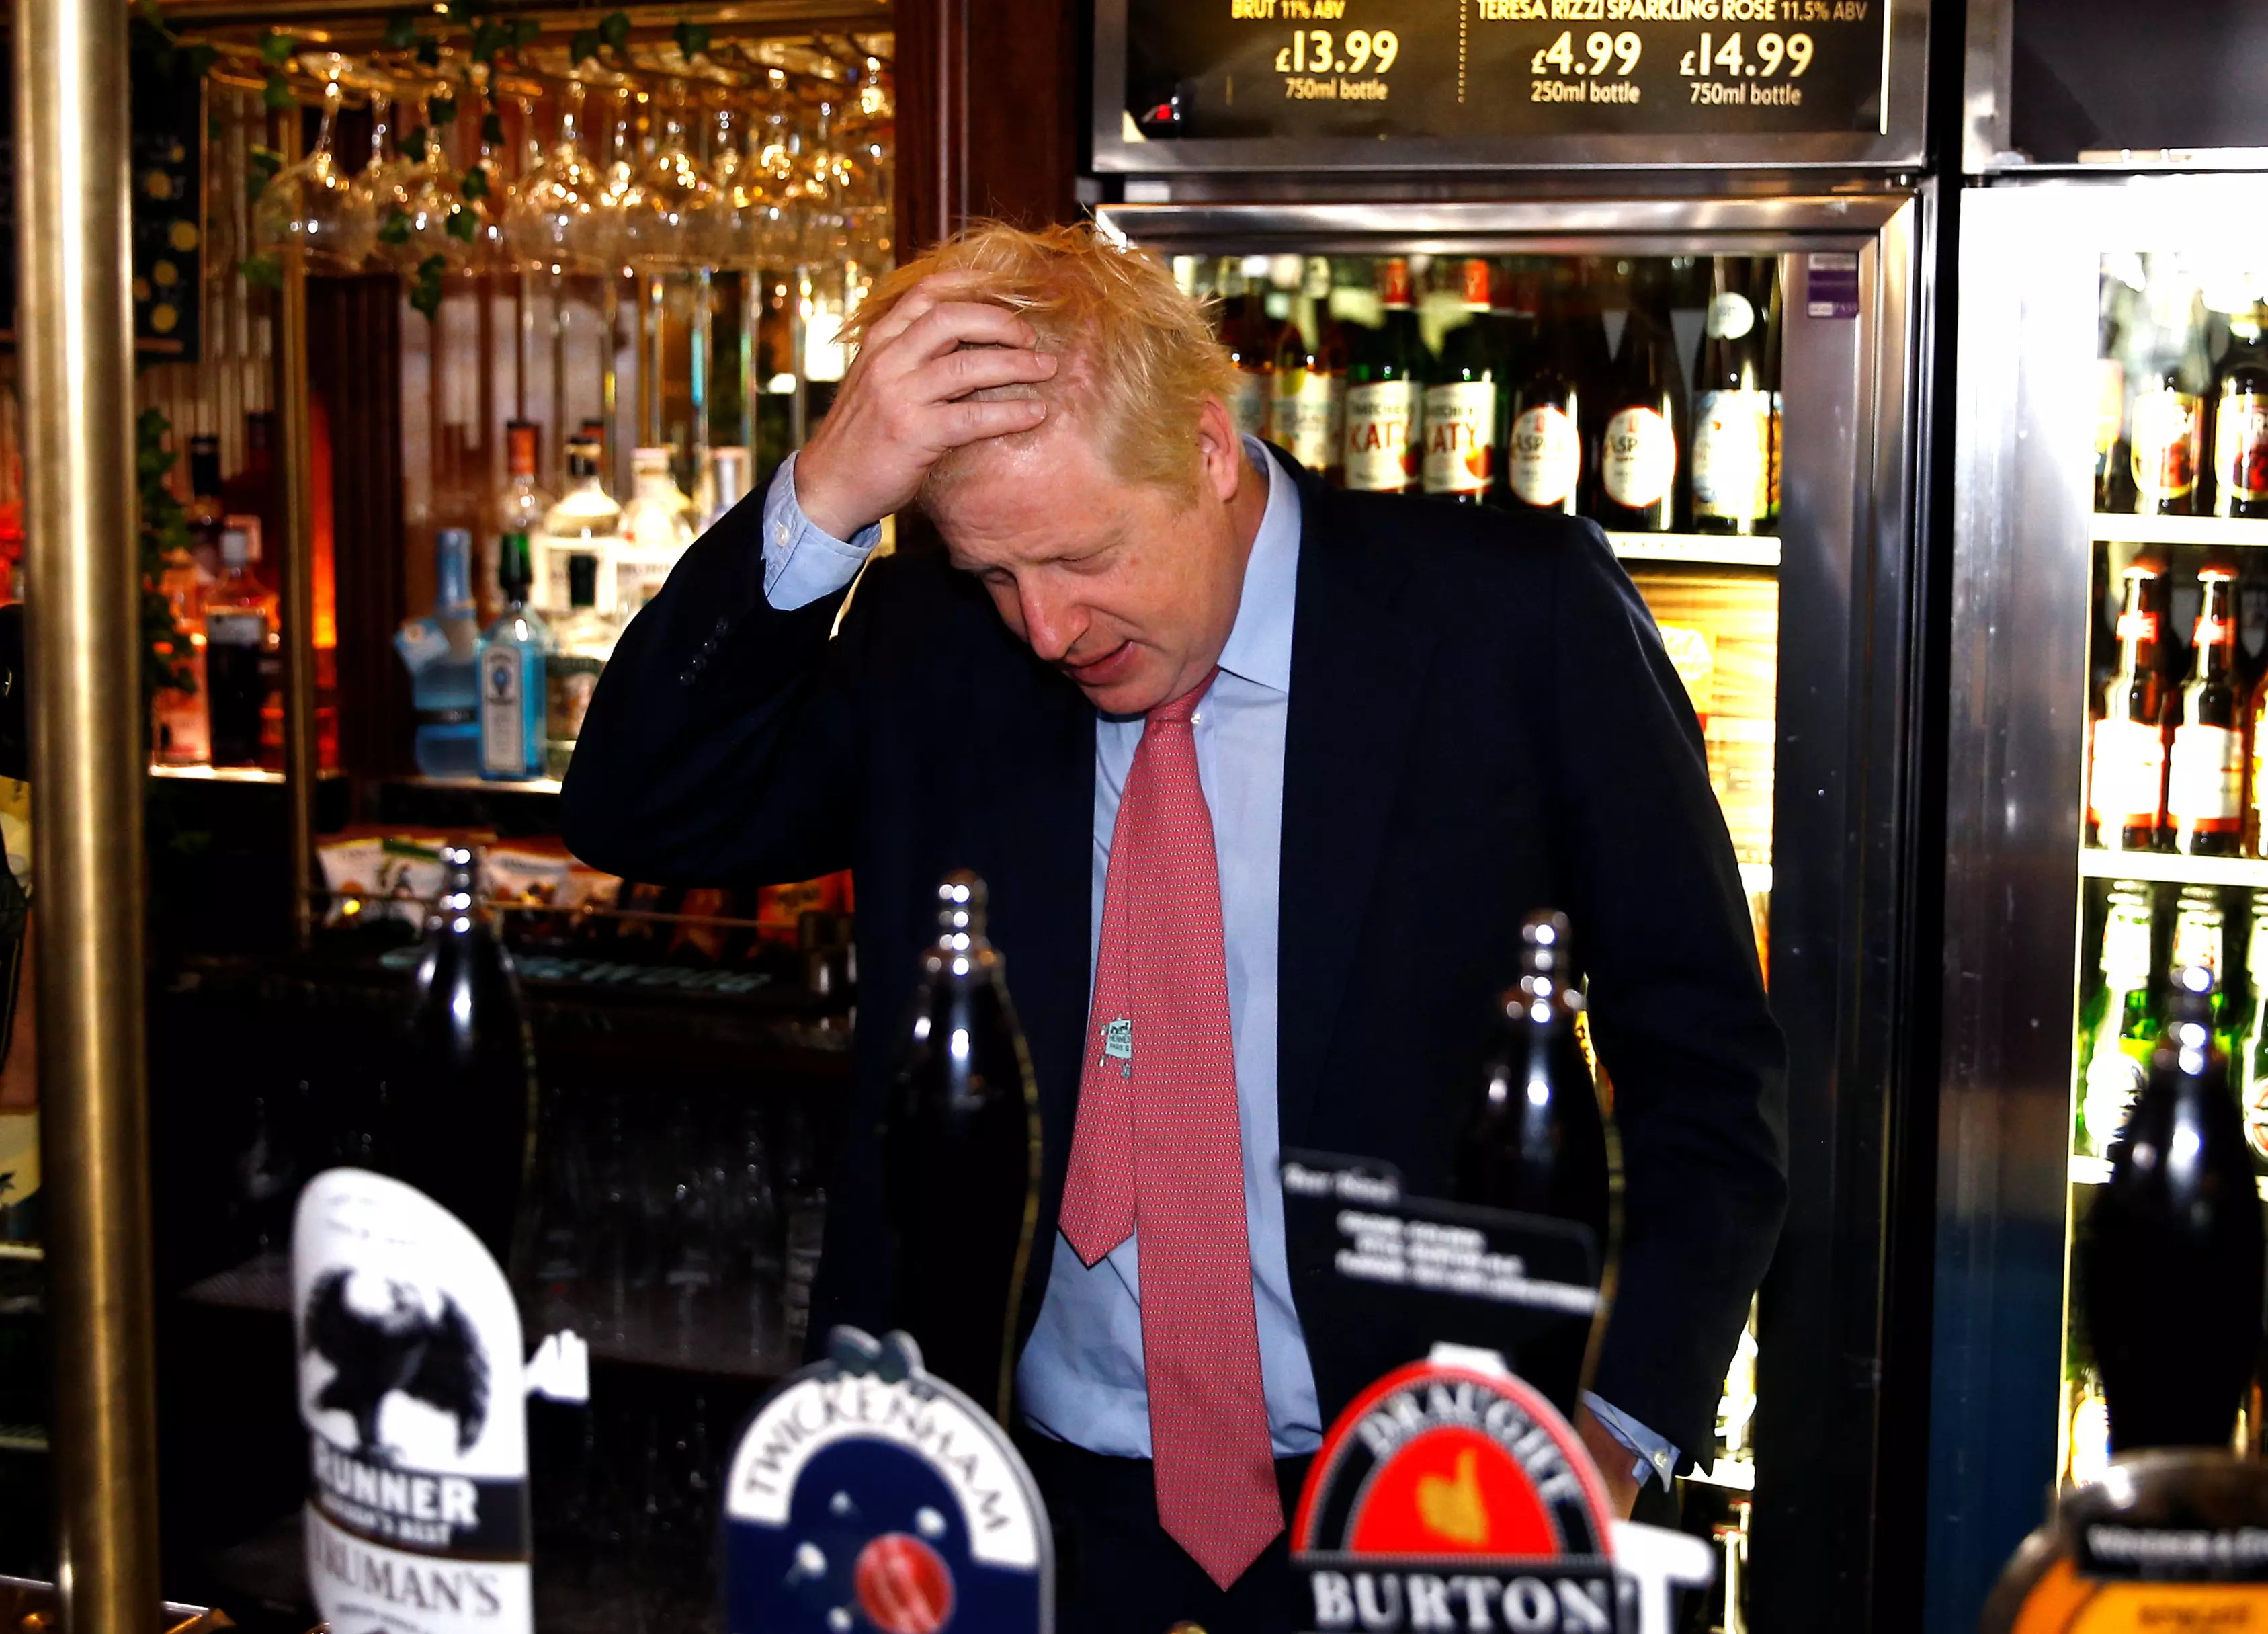 Boris Johnson has closed all the pubs, bars, cafes and restaurants in the UK.